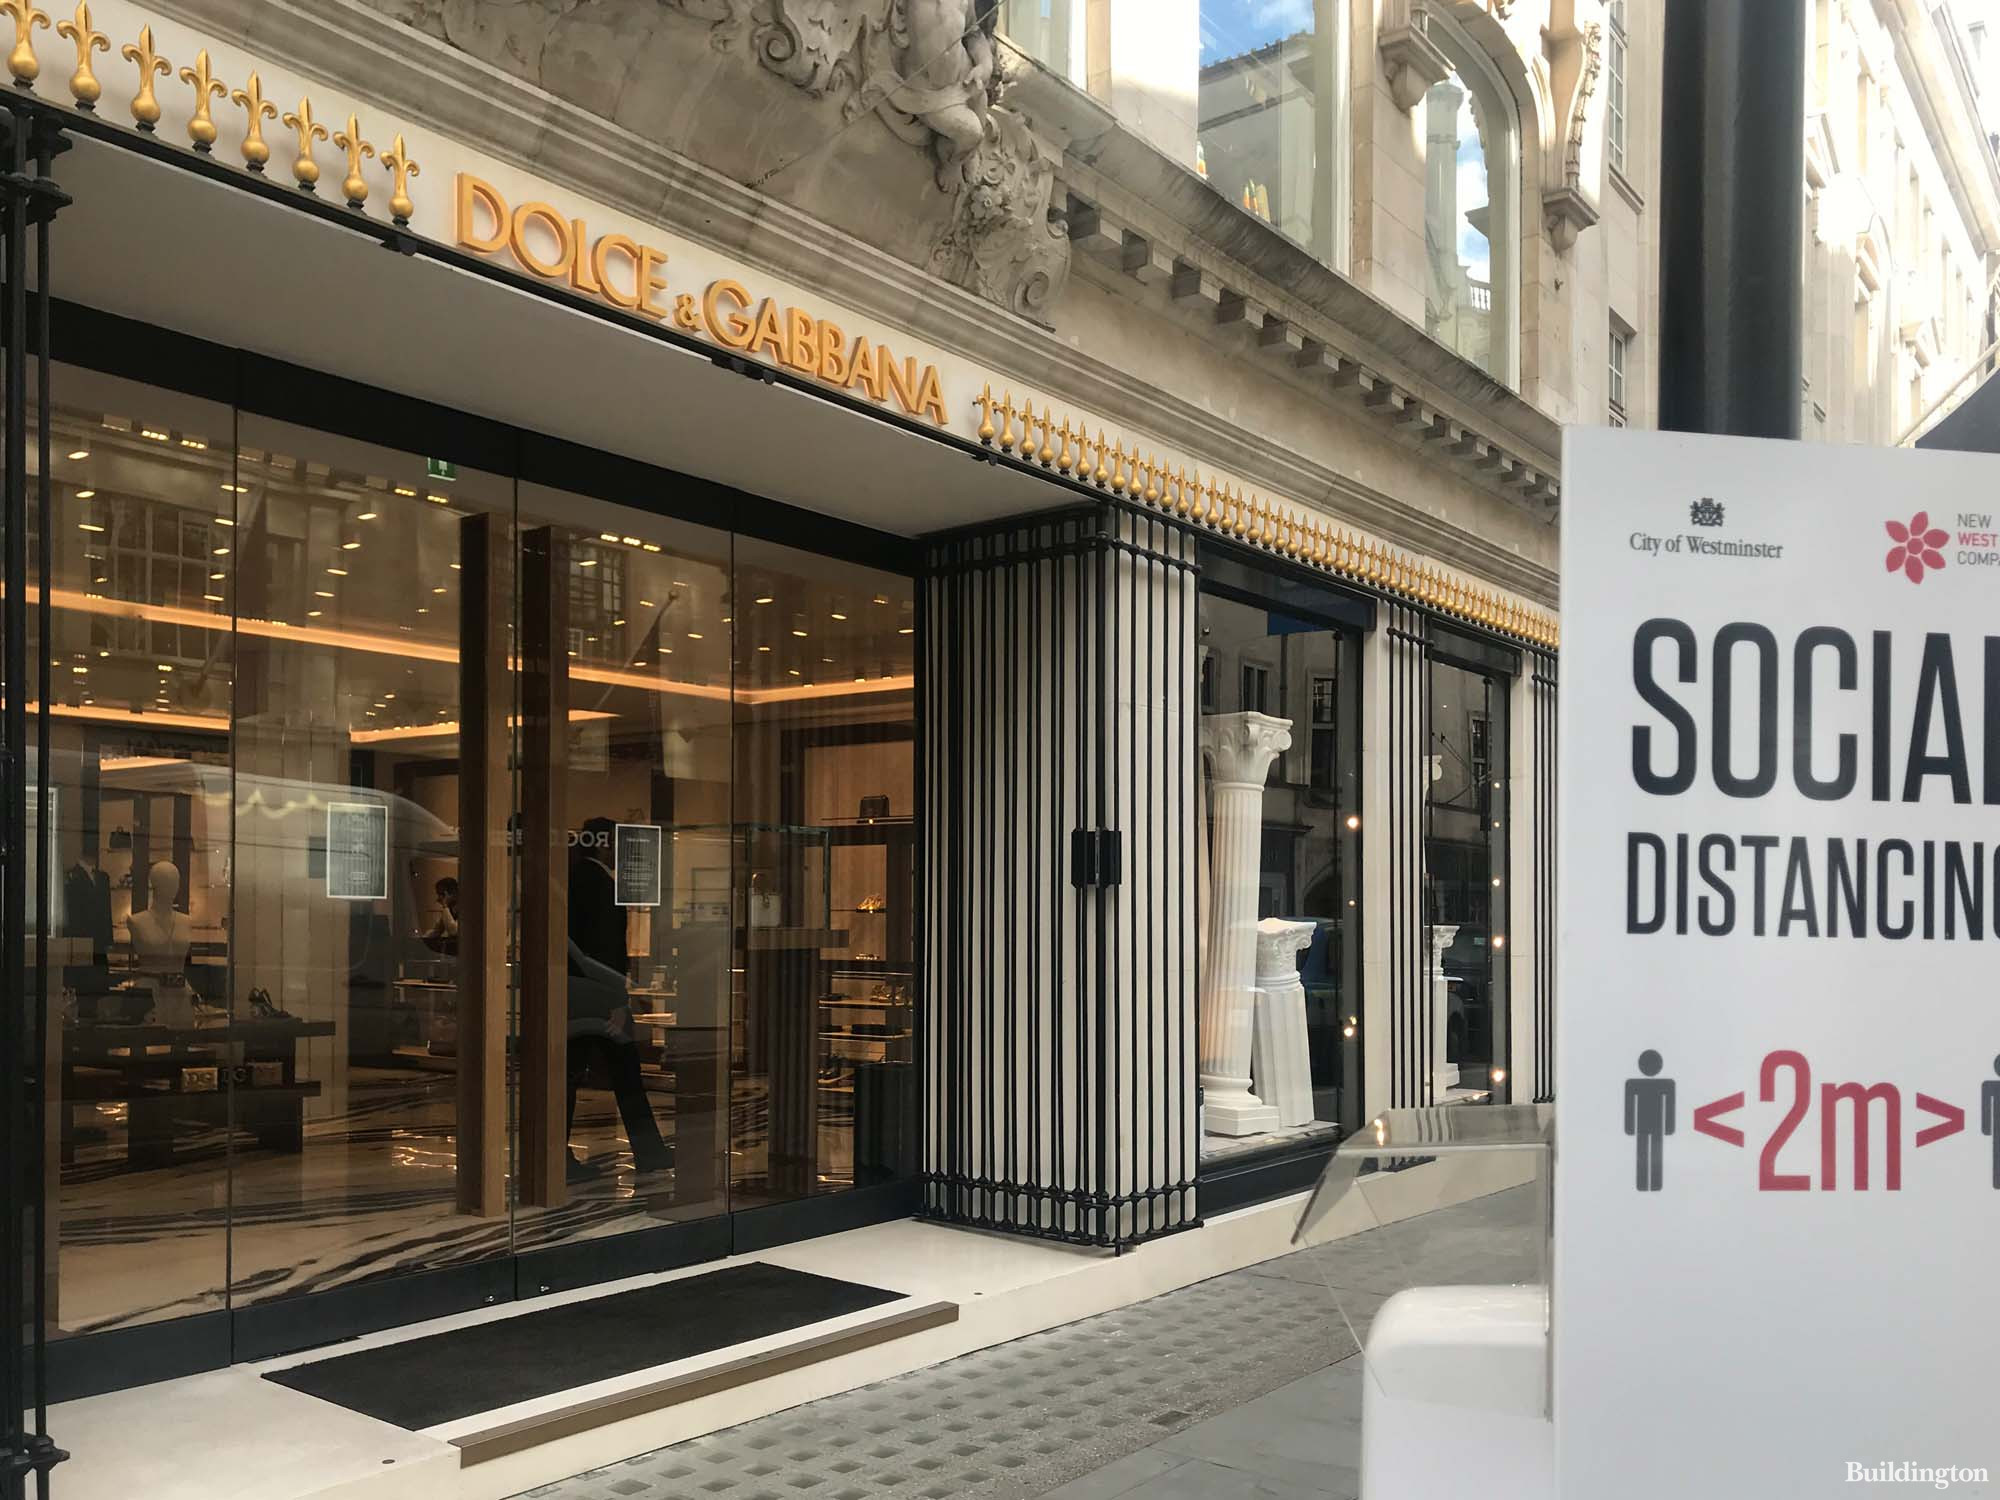 Social distancing banner in front of Dolce & Gabbana store at 6-8 Old Bond Street in Mayfair, London W1.